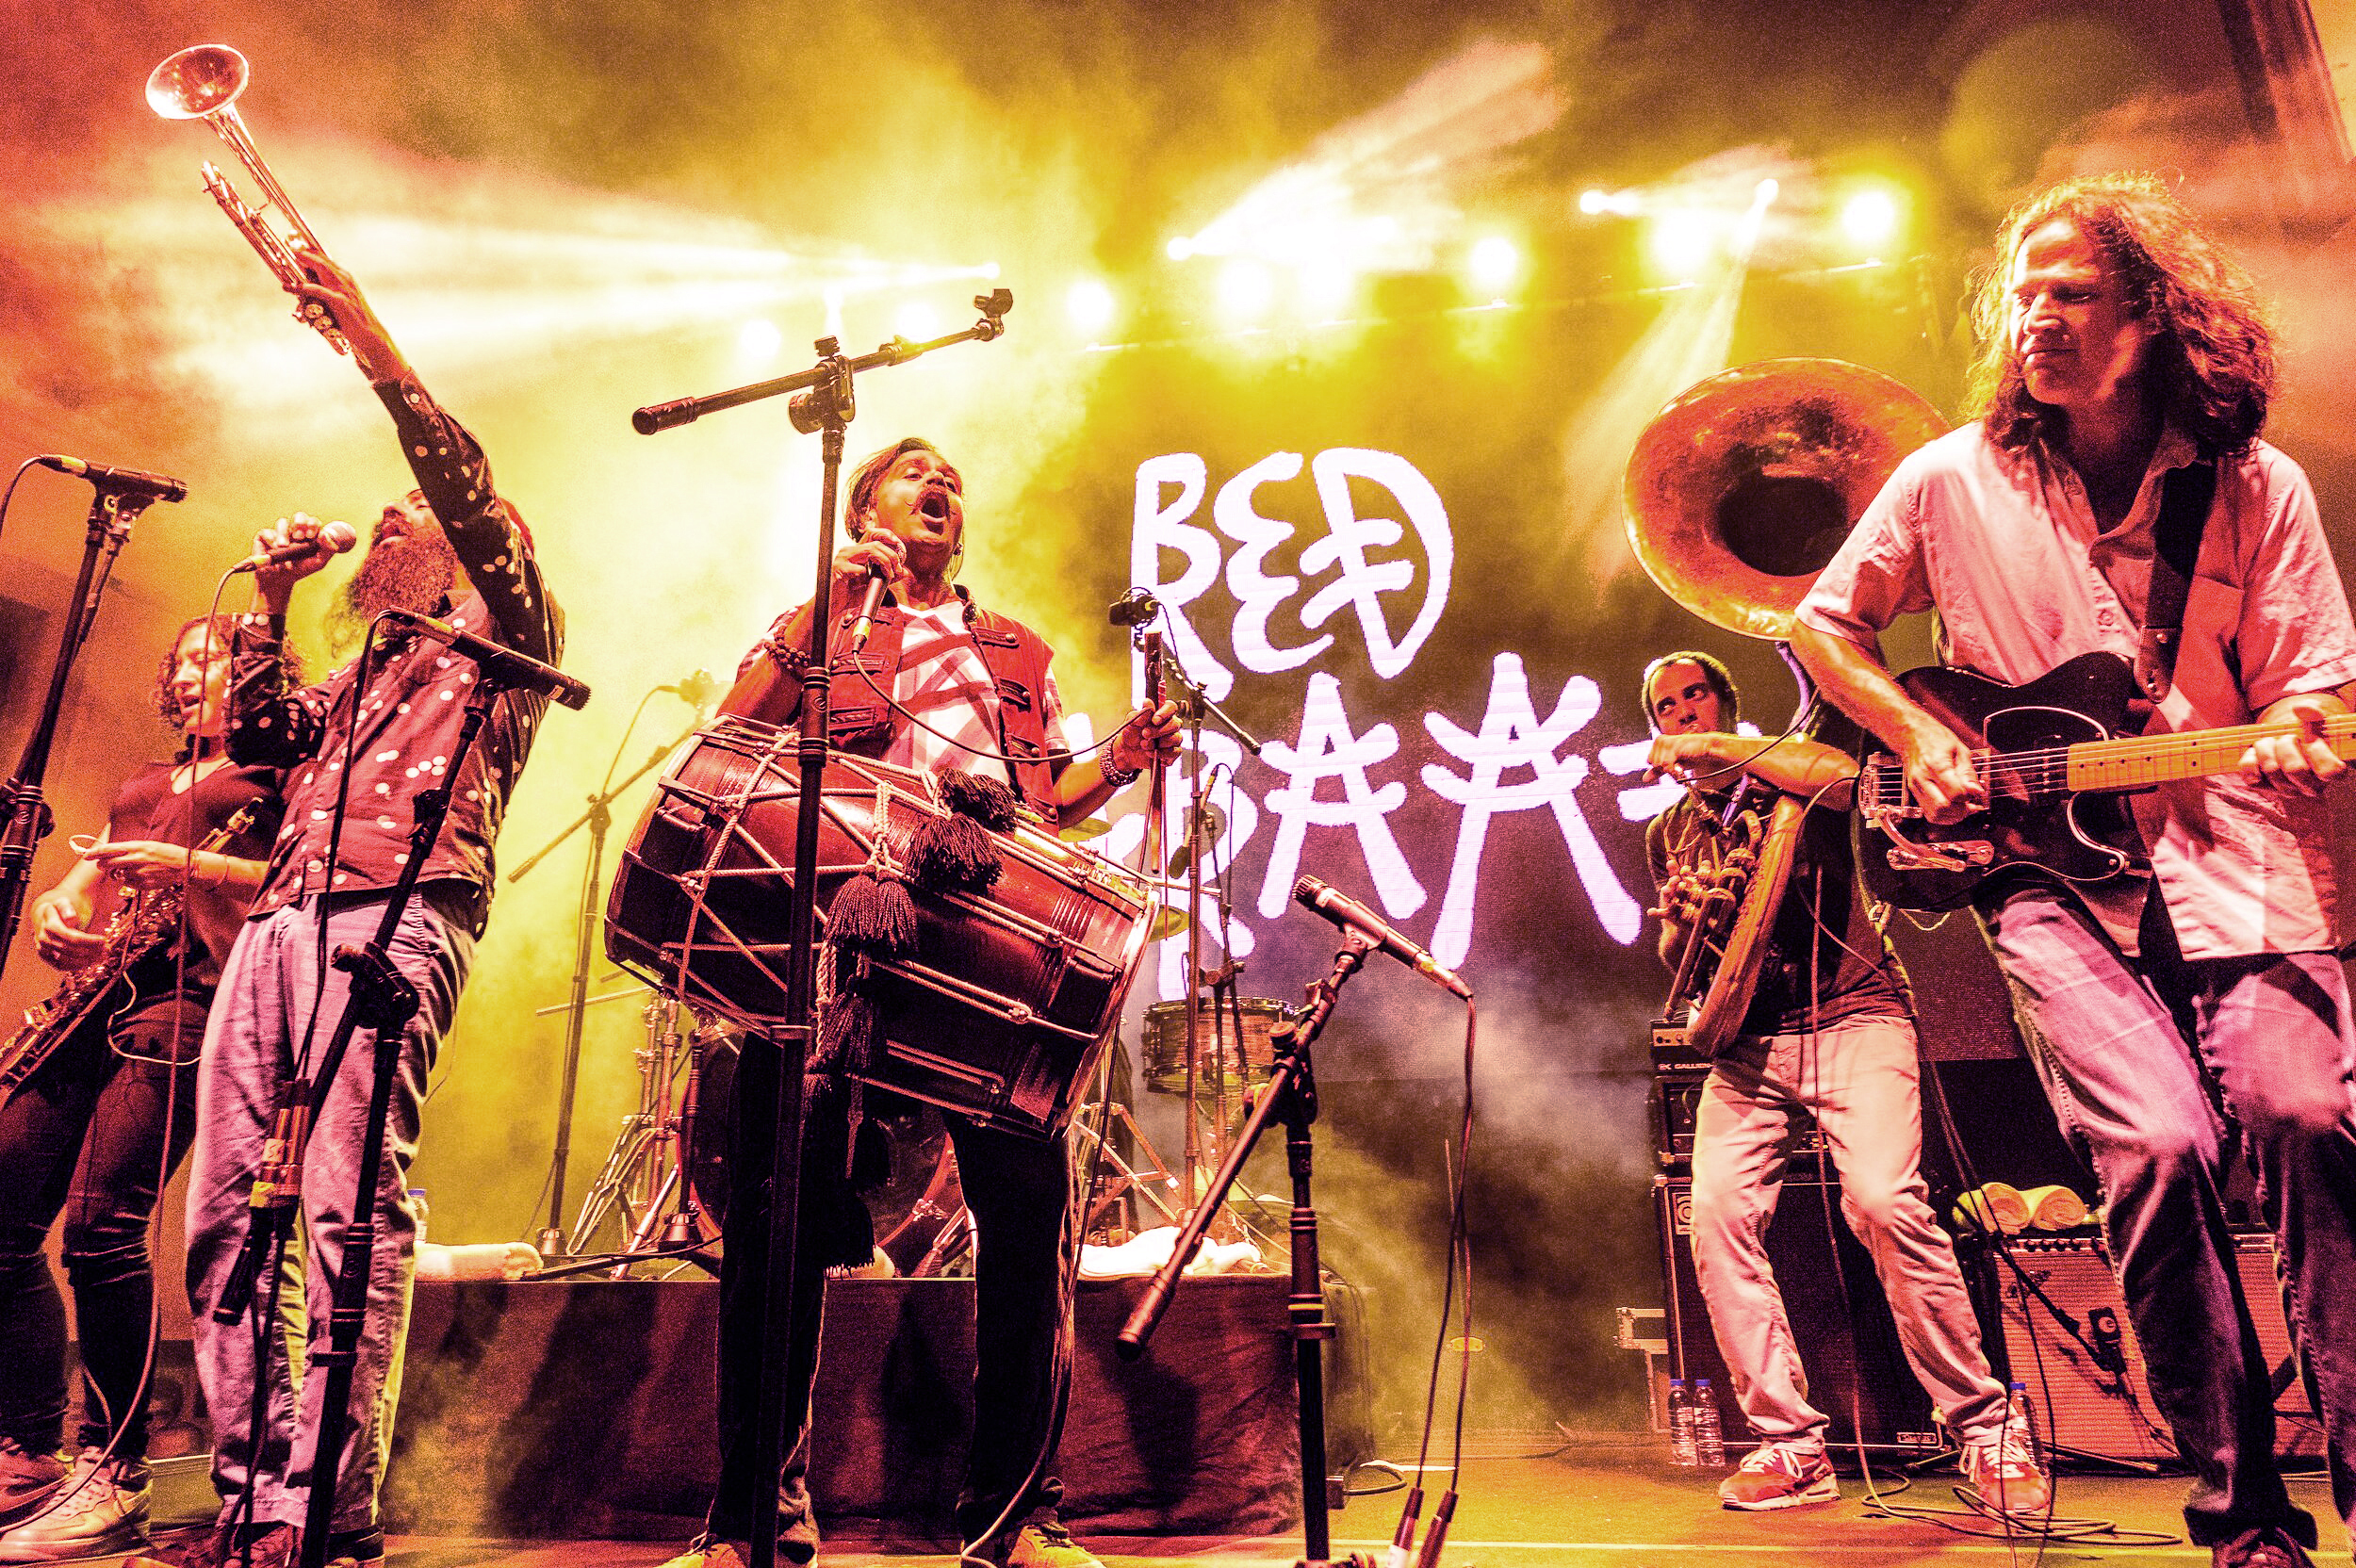 Red Baraat performs on September 23 as part of the Sag Harbor American Music Festival. COURTESY SHAMF